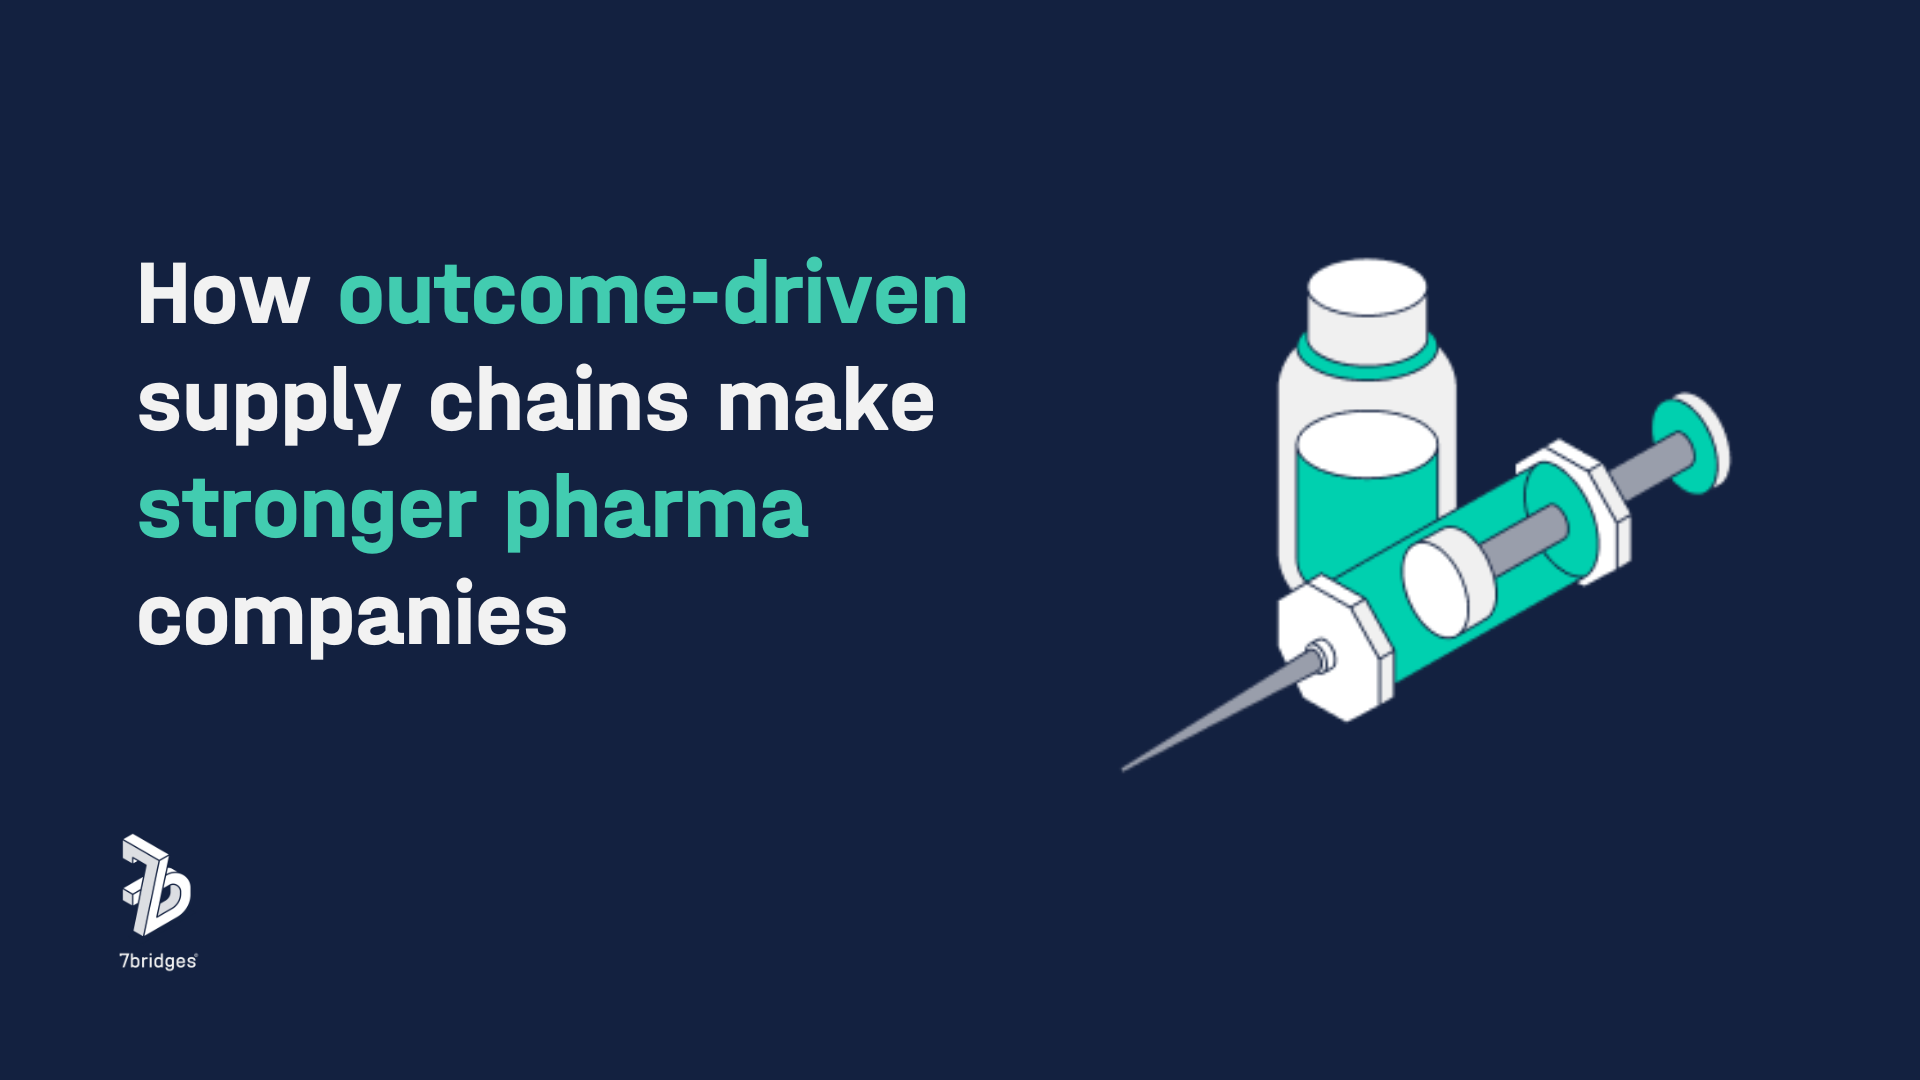 how outcome-driven supply chains make stronger pharma companies on blue background with illustration of syringe and medicine